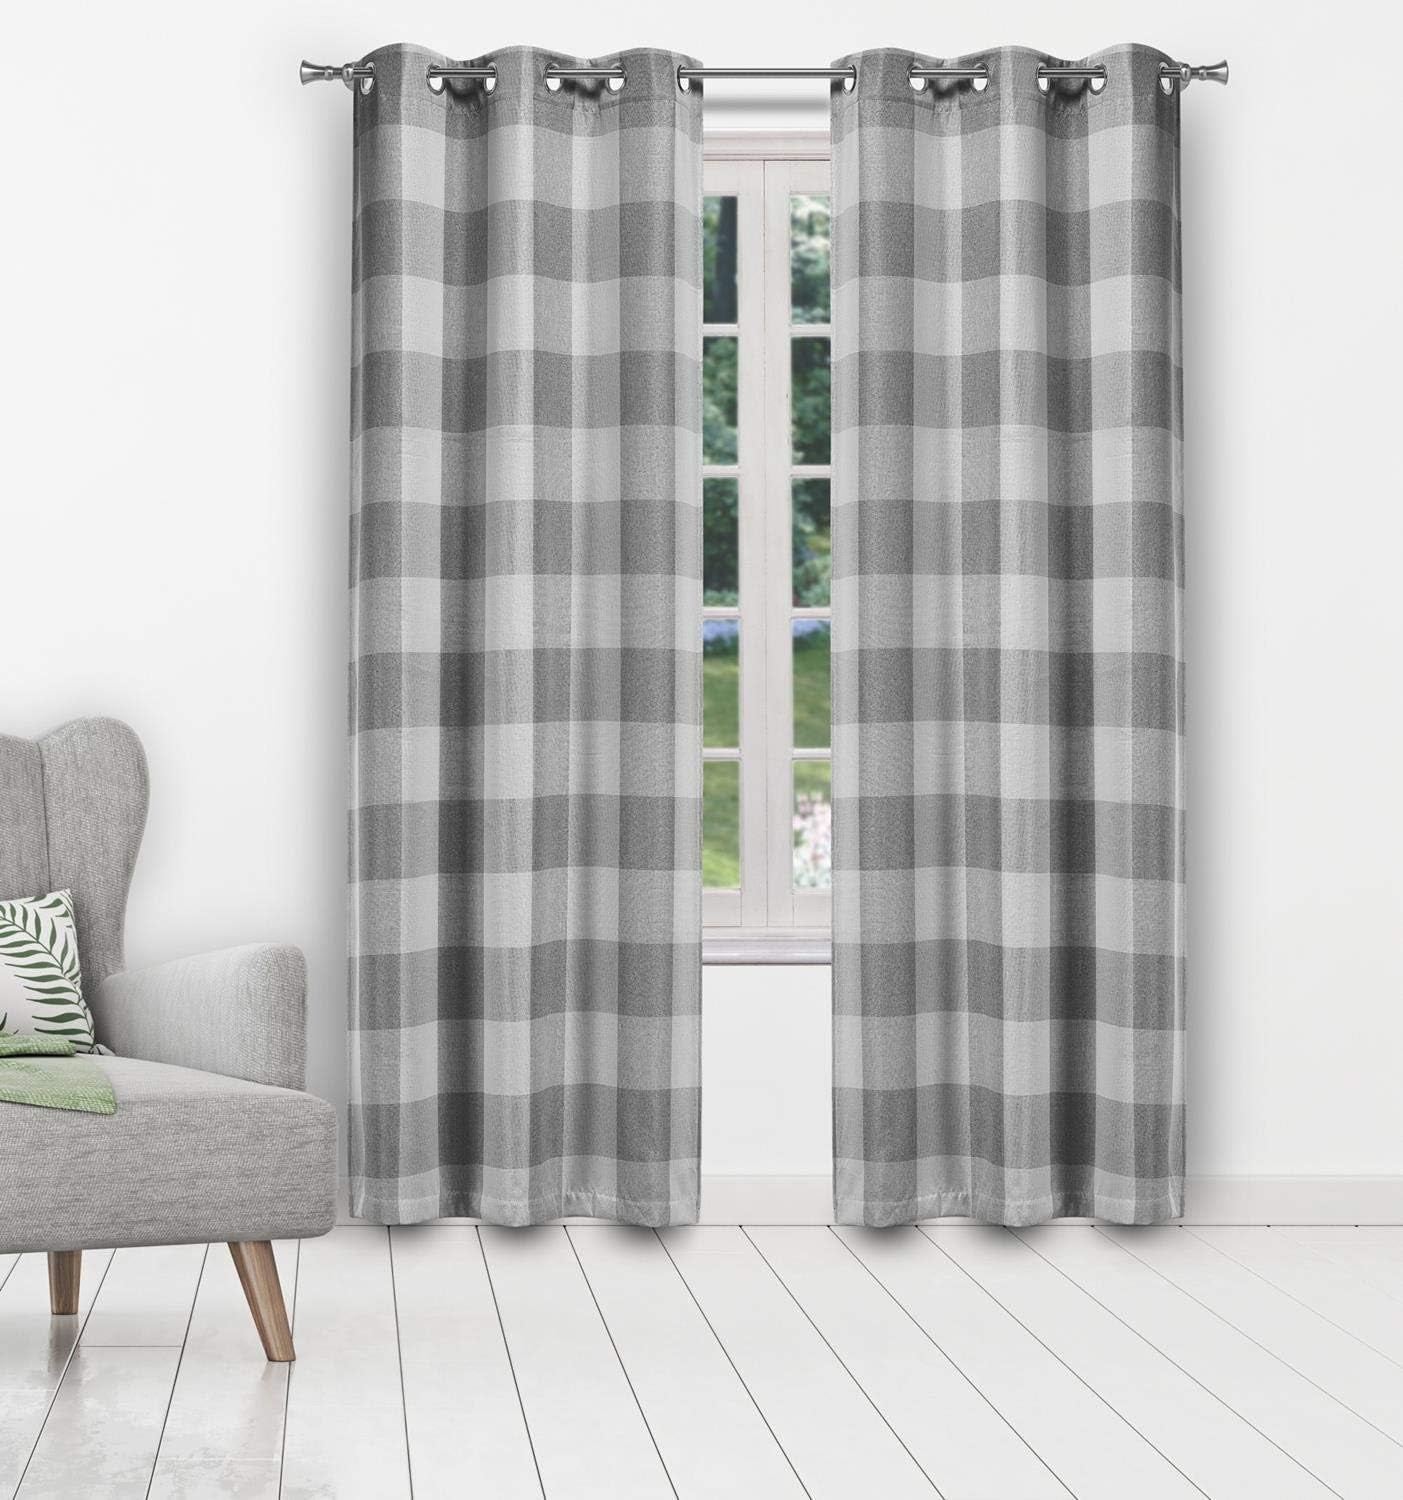 Blackout 365 Aaron Checkered Set Buffalo Plaid Blackout Bedroom-Insulated and Energy Efficient Rod Pocket Window Curtains for Living Room, 37 in X 84 in (W X L), Grey  Blackout 365 Gray 37 In X 96 In (W X L) 